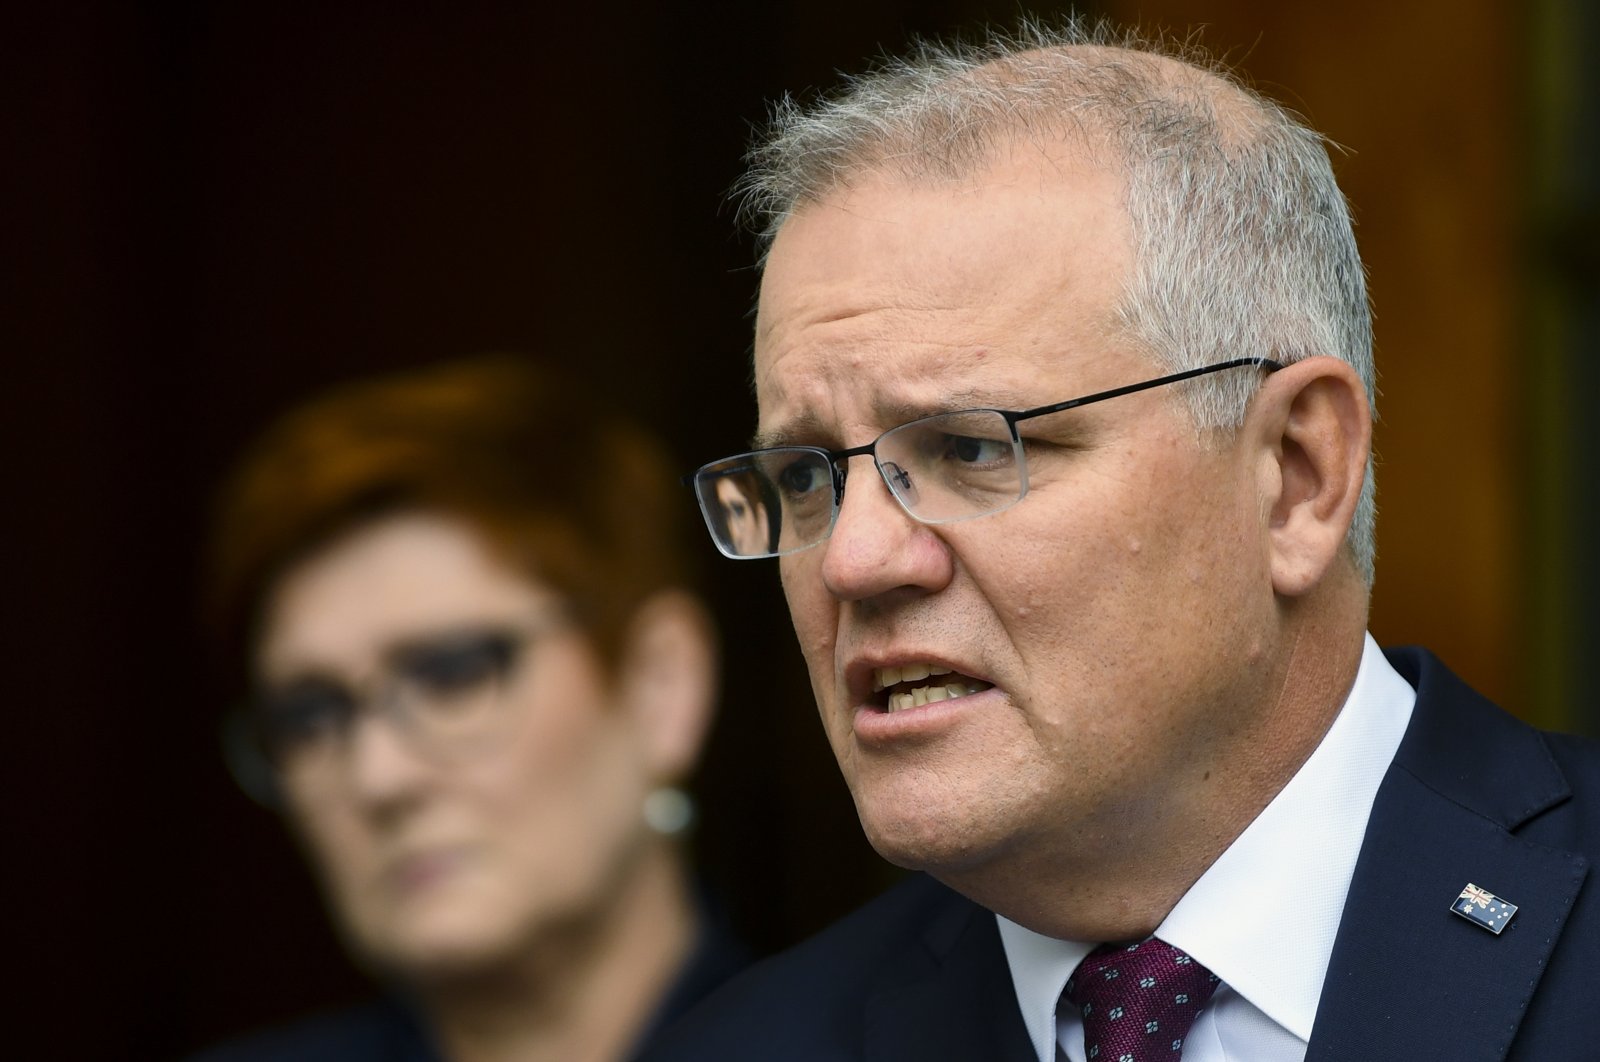 Australian Prime Minister Scott Morrison speaks to the media during a press conference at Parliament House, Canberra, Australia, March 17, 2021. (AP Photo)